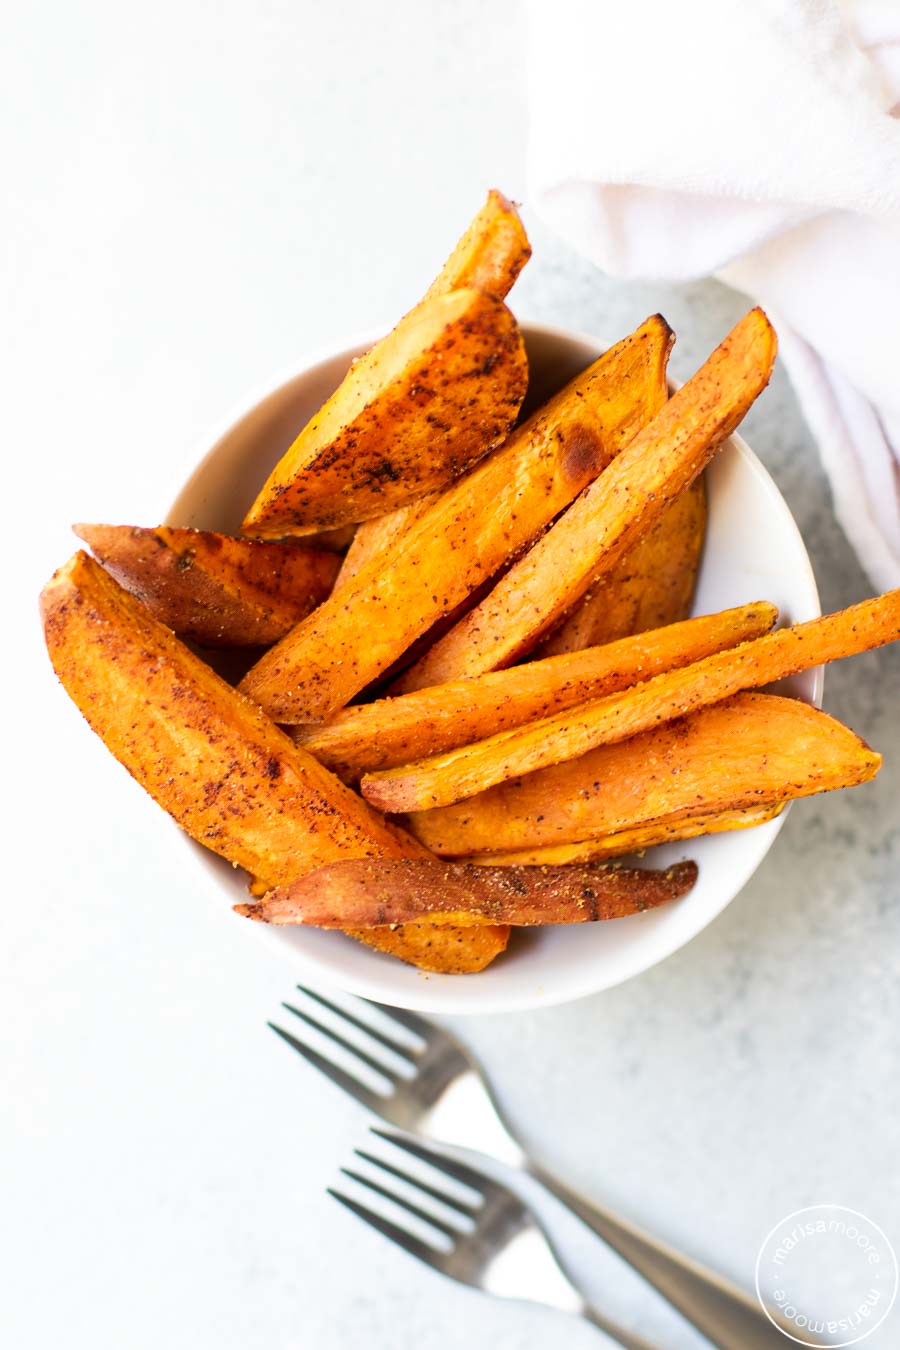 https://marisamoore.com/wp-content/uploads/2012/11/baked-sweet-potatoes-in-a-bowl-overhead.jpg